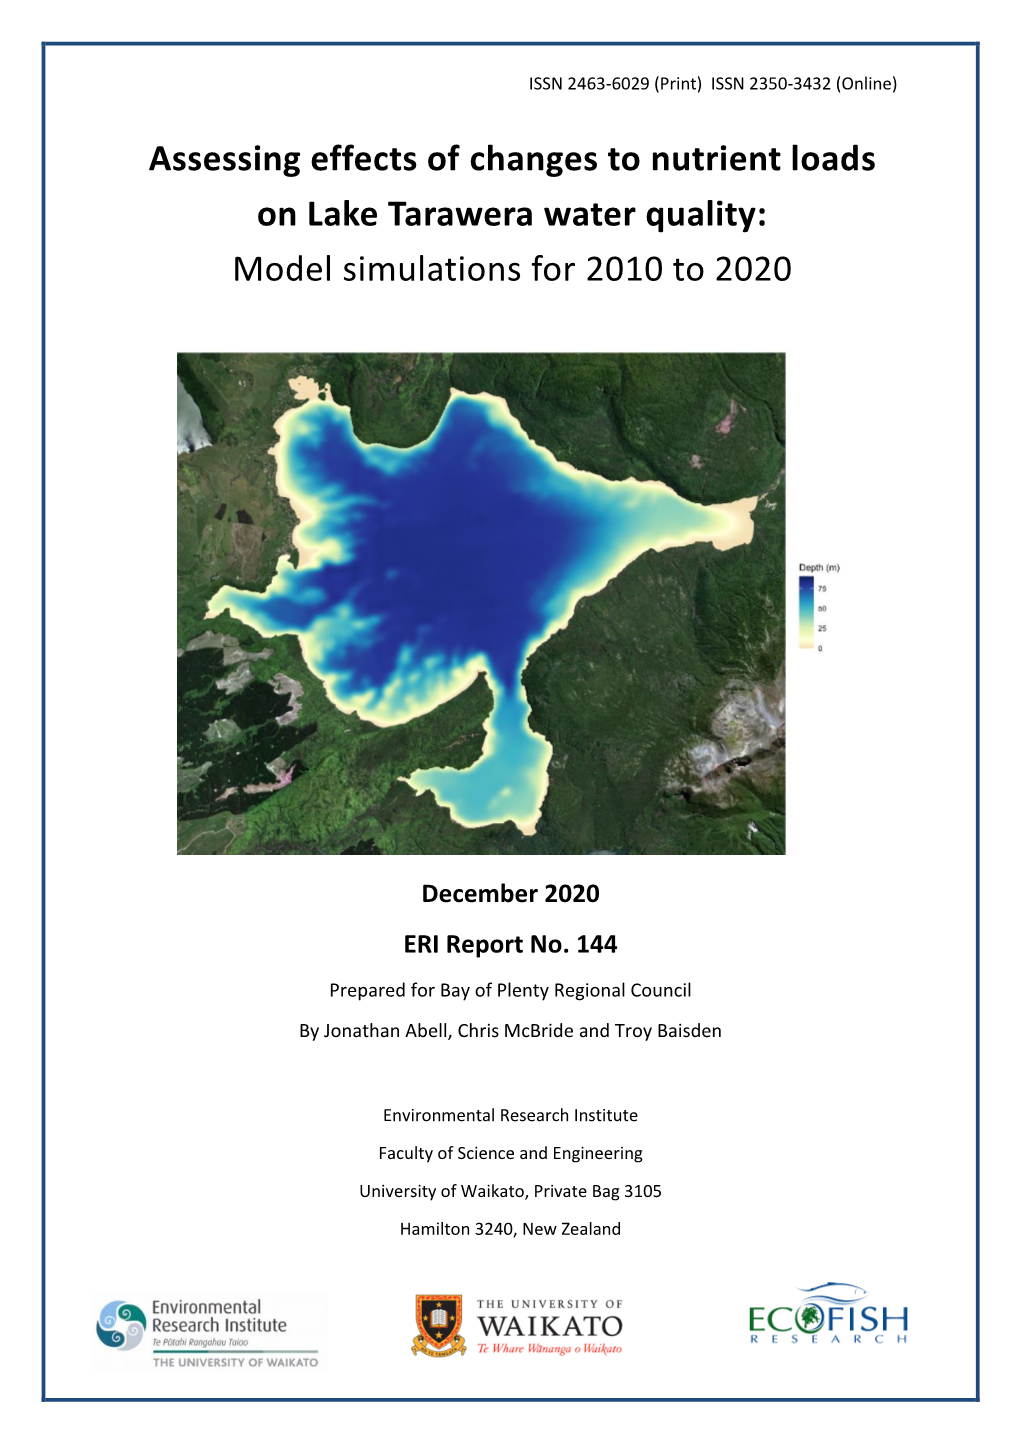 Assessing Effects of Changes to Nutrient Loads on Lake Tarawera Water Quality: Model Simulations for 2010 to 2020